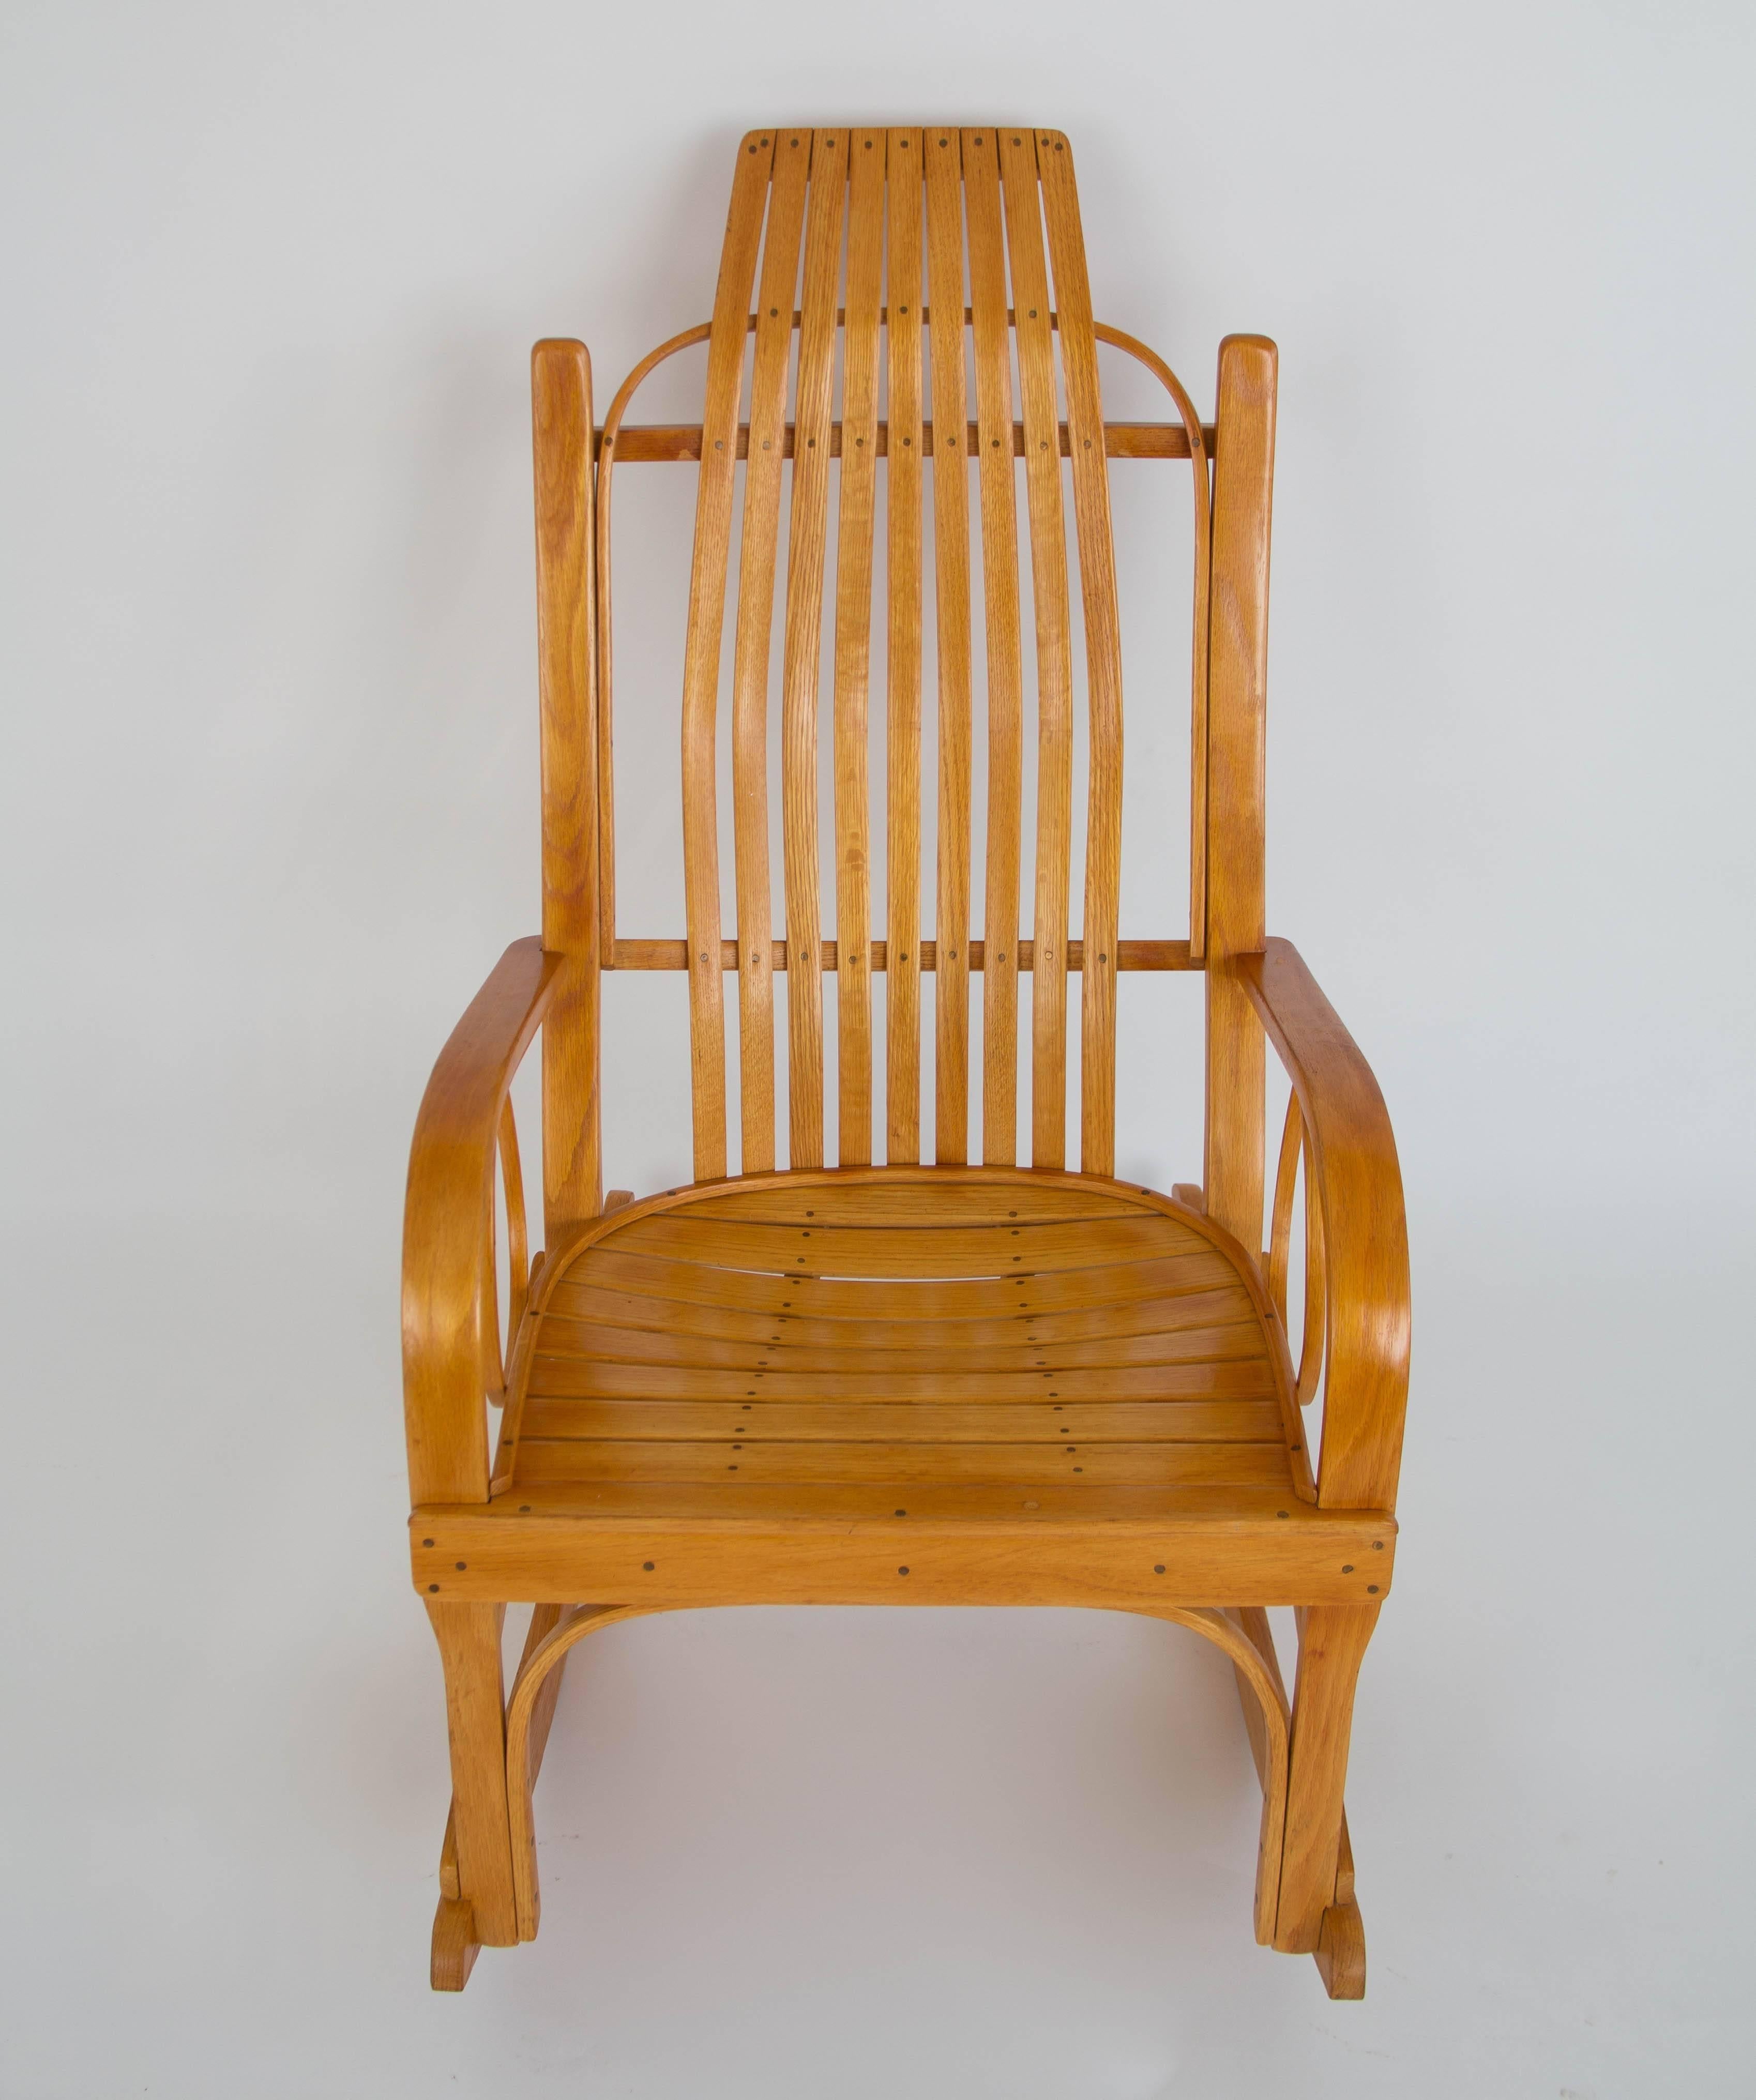 Contemporary Bentwood Adirondack Rocking Chair with Slatted Seat